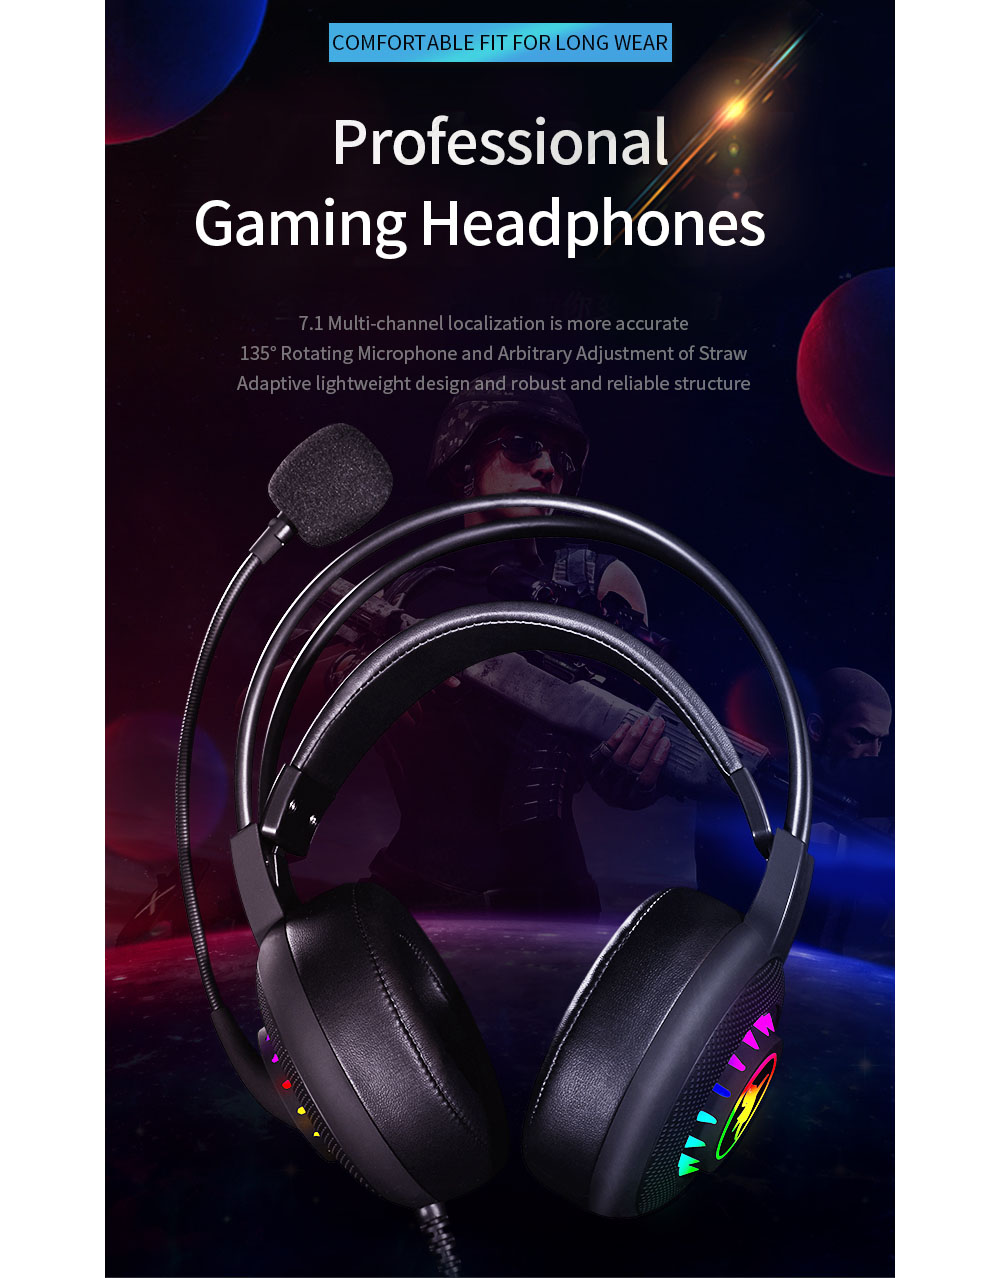 G50-Gaming-Headset-Wired-Luminous-Free-Drive-71-Virtual-Stereo-Surround-Sound-RGB-Light-Noise-Reduct-1753041-1